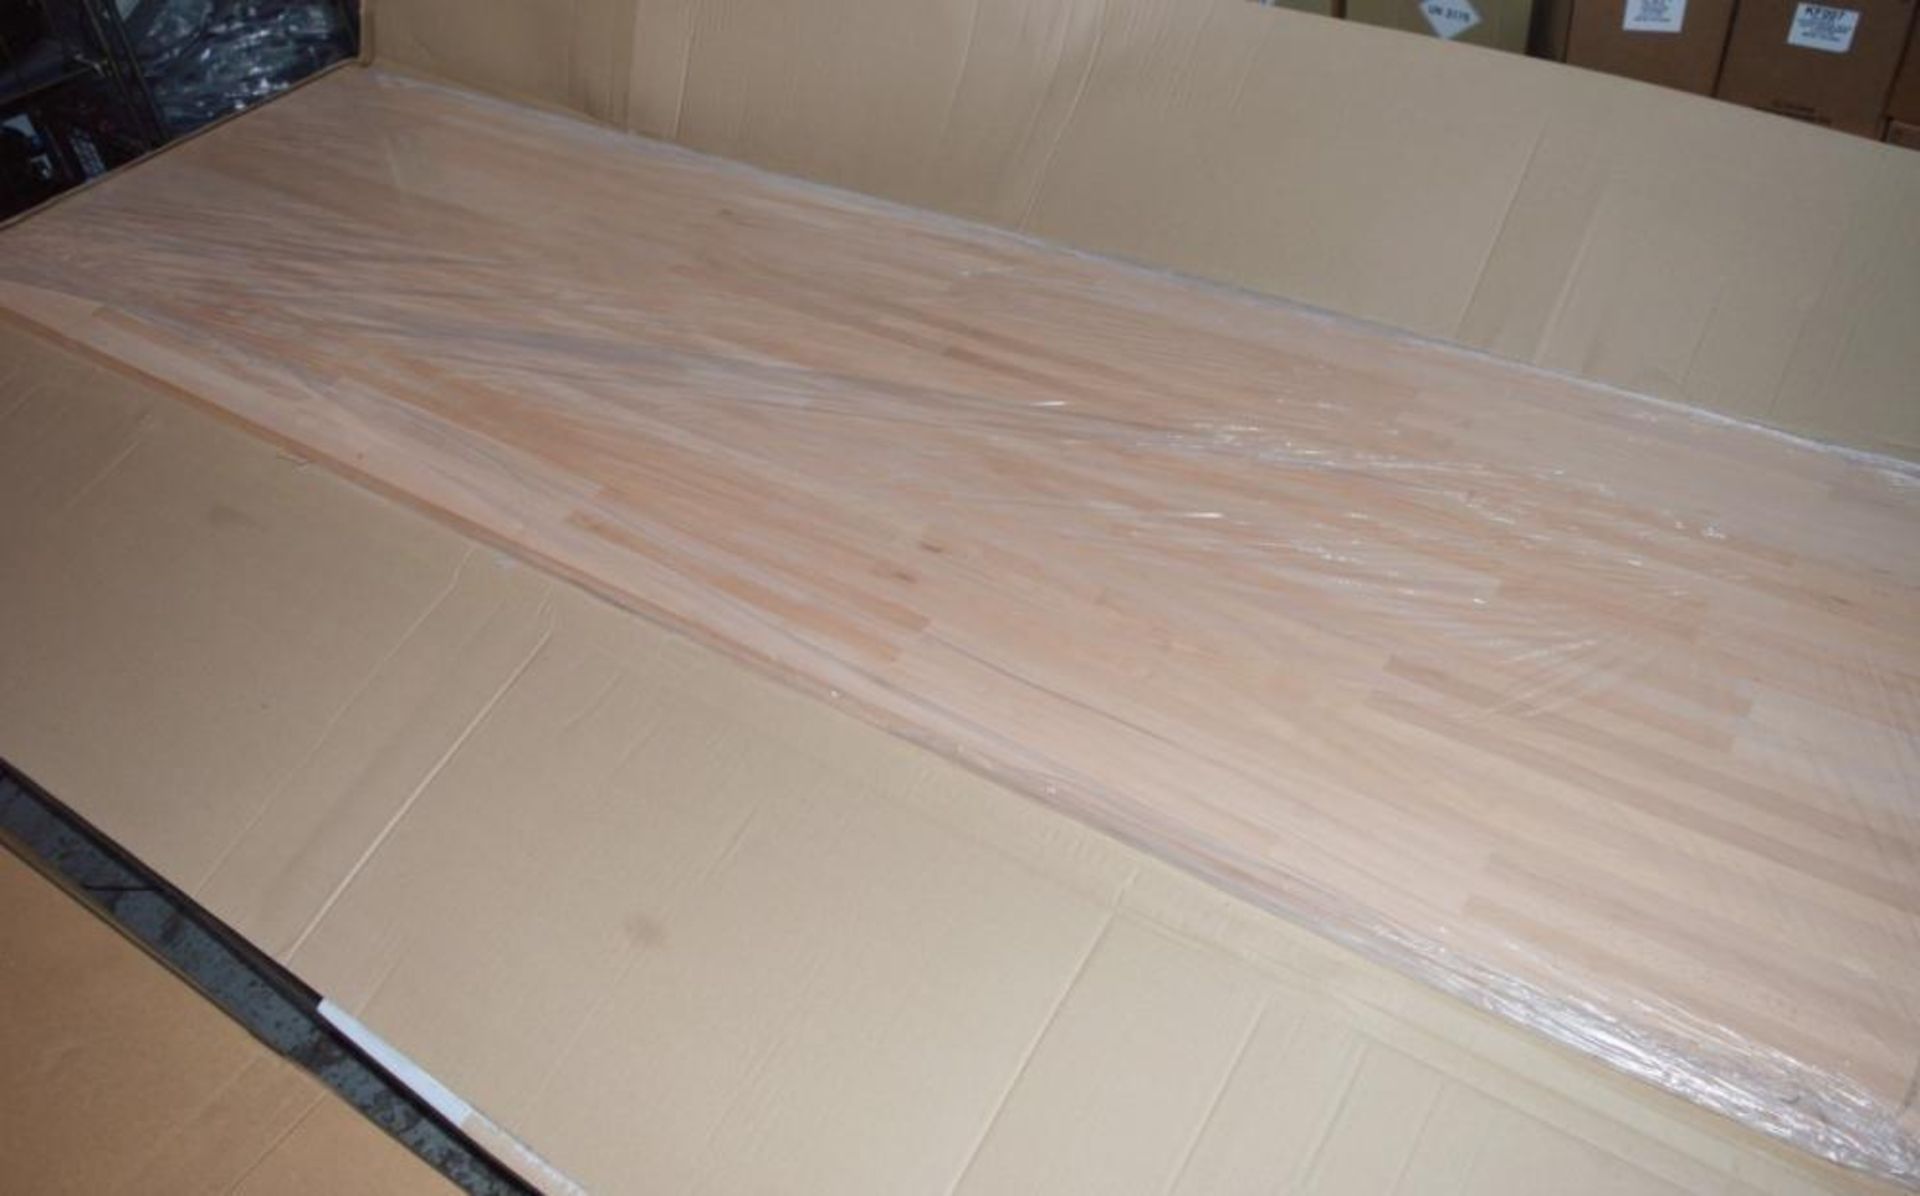 4 x Solid Wood Kitchen Worktops - PRIME BEECH - First Grade Finger Jointed Kitchen Worktop - Size: 2 - Image 2 of 5